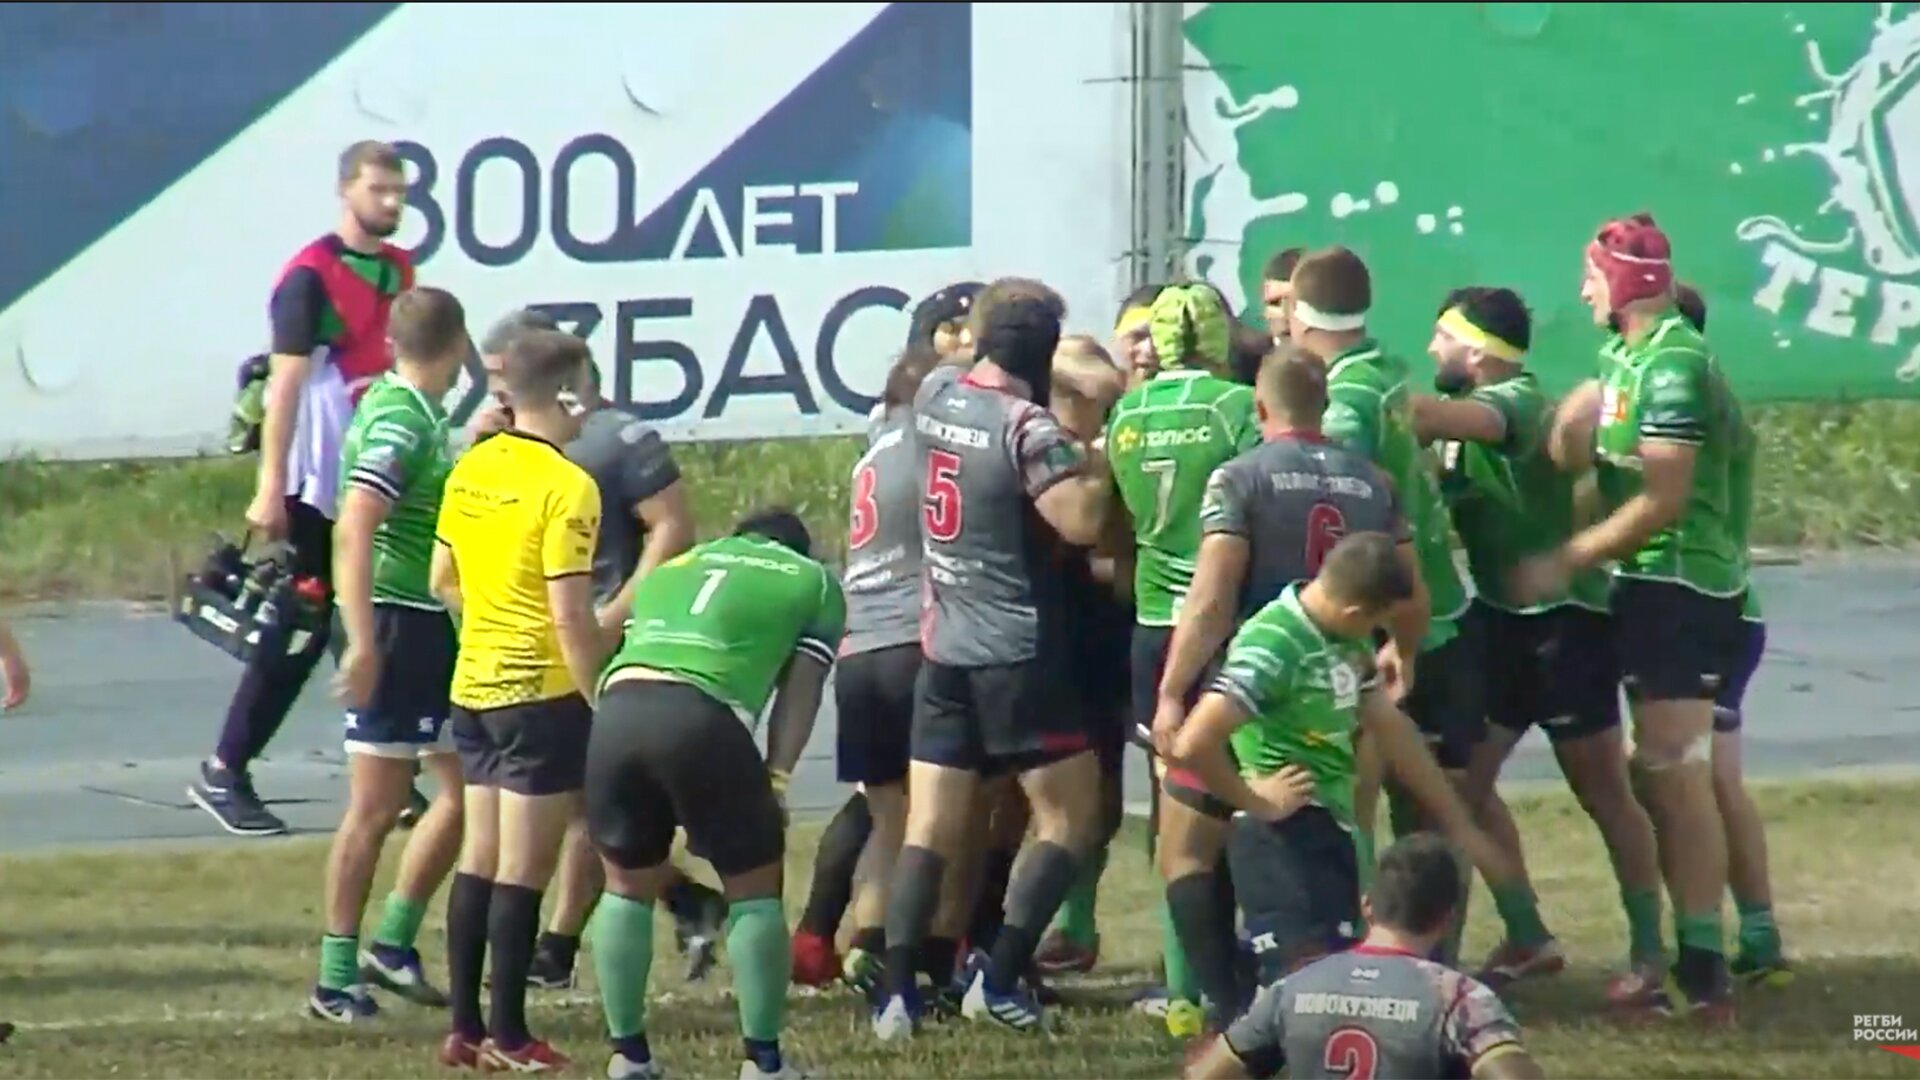 Live rugby is happening RIGHT NOW in Russia and it is absolutely insane